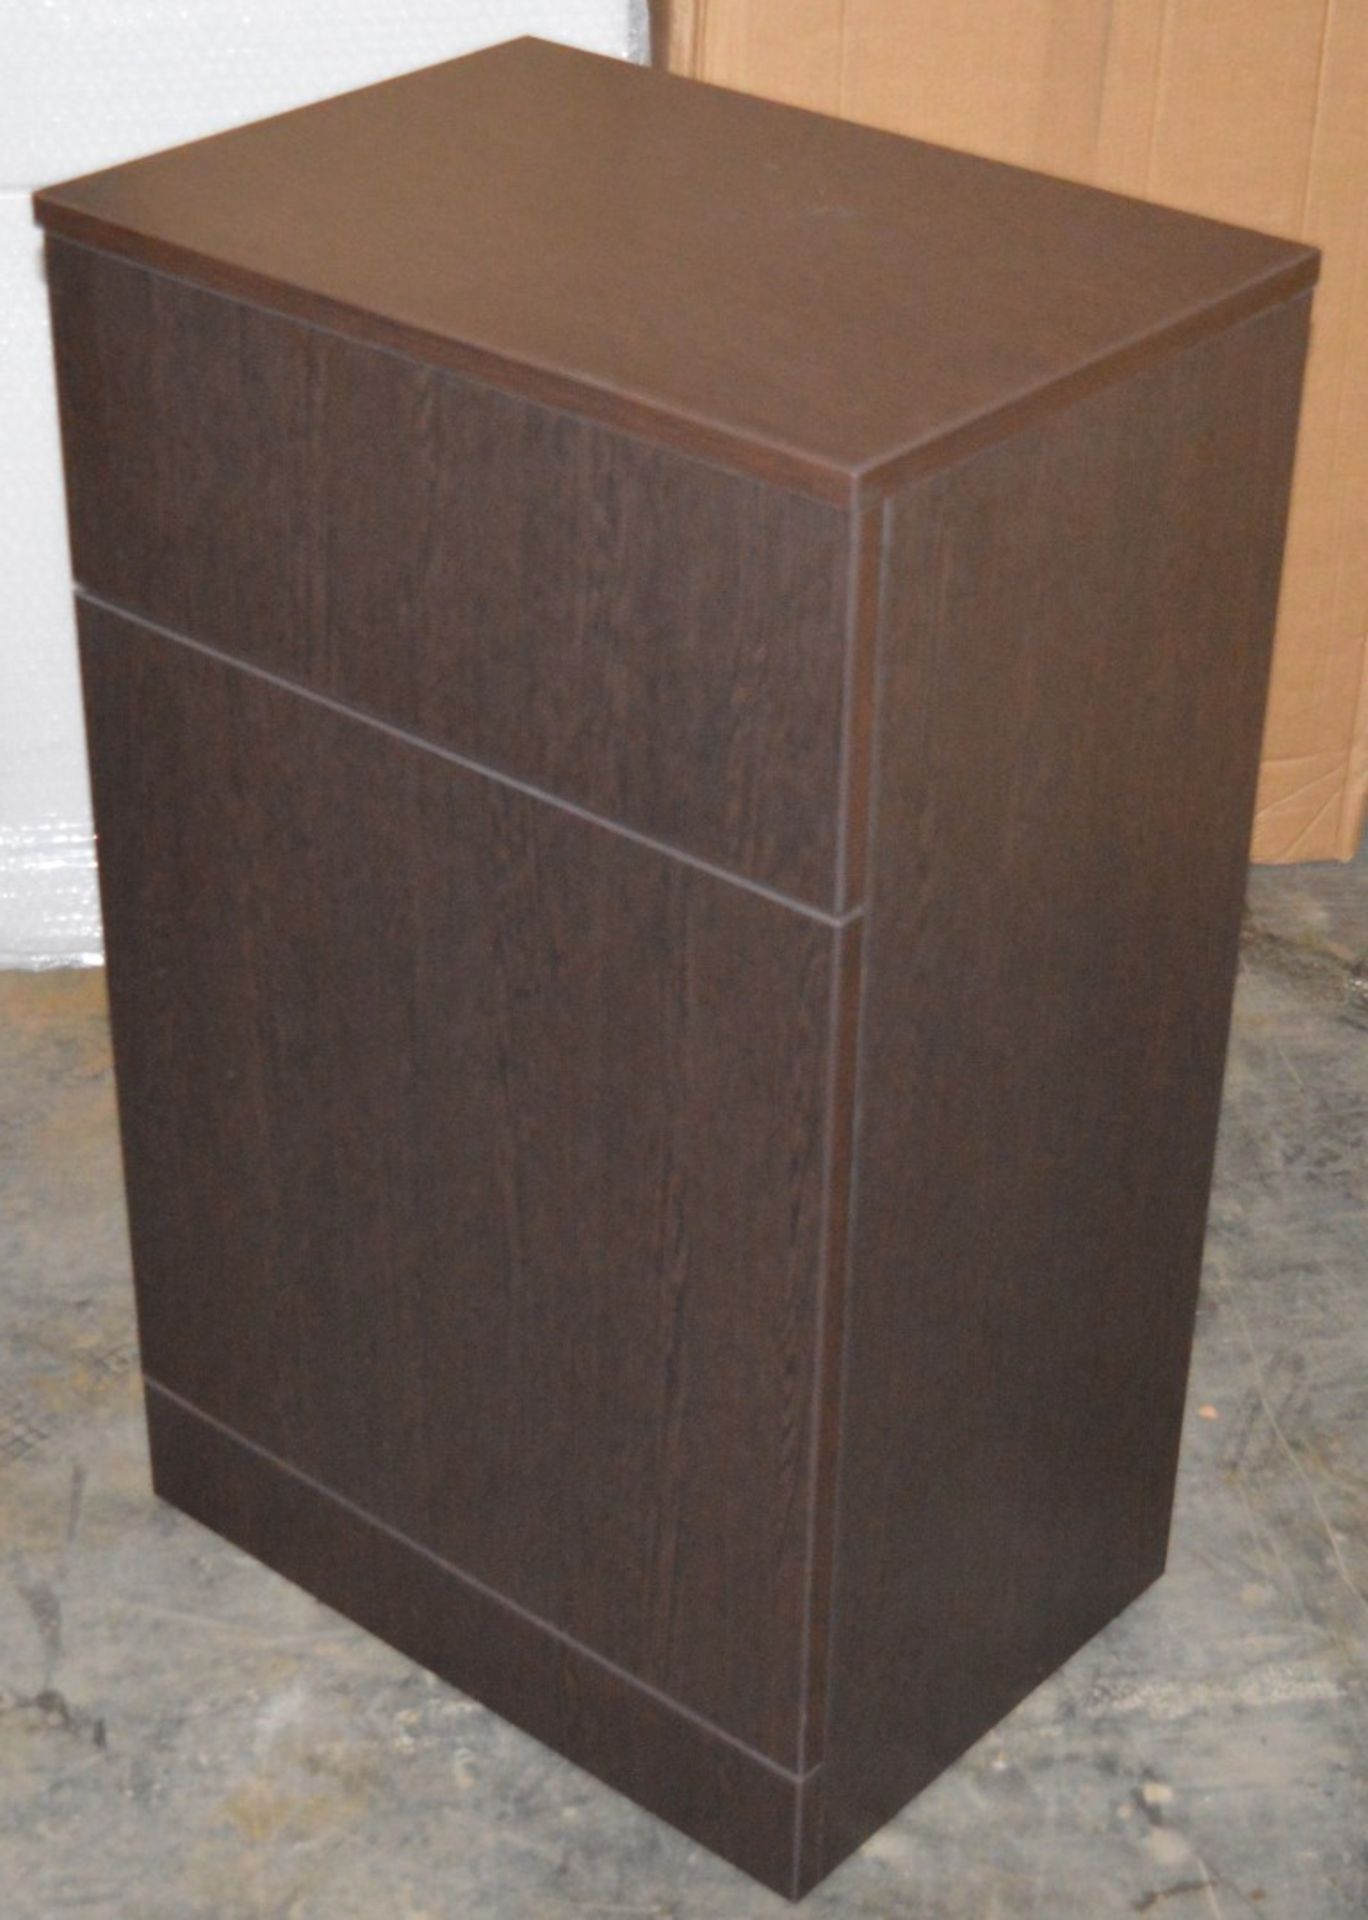 1 x Venizia BTW Toilet Pan Unit in Wenge With Concealed Cistern - 500mm Width - Includes Push Button - Image 4 of 4